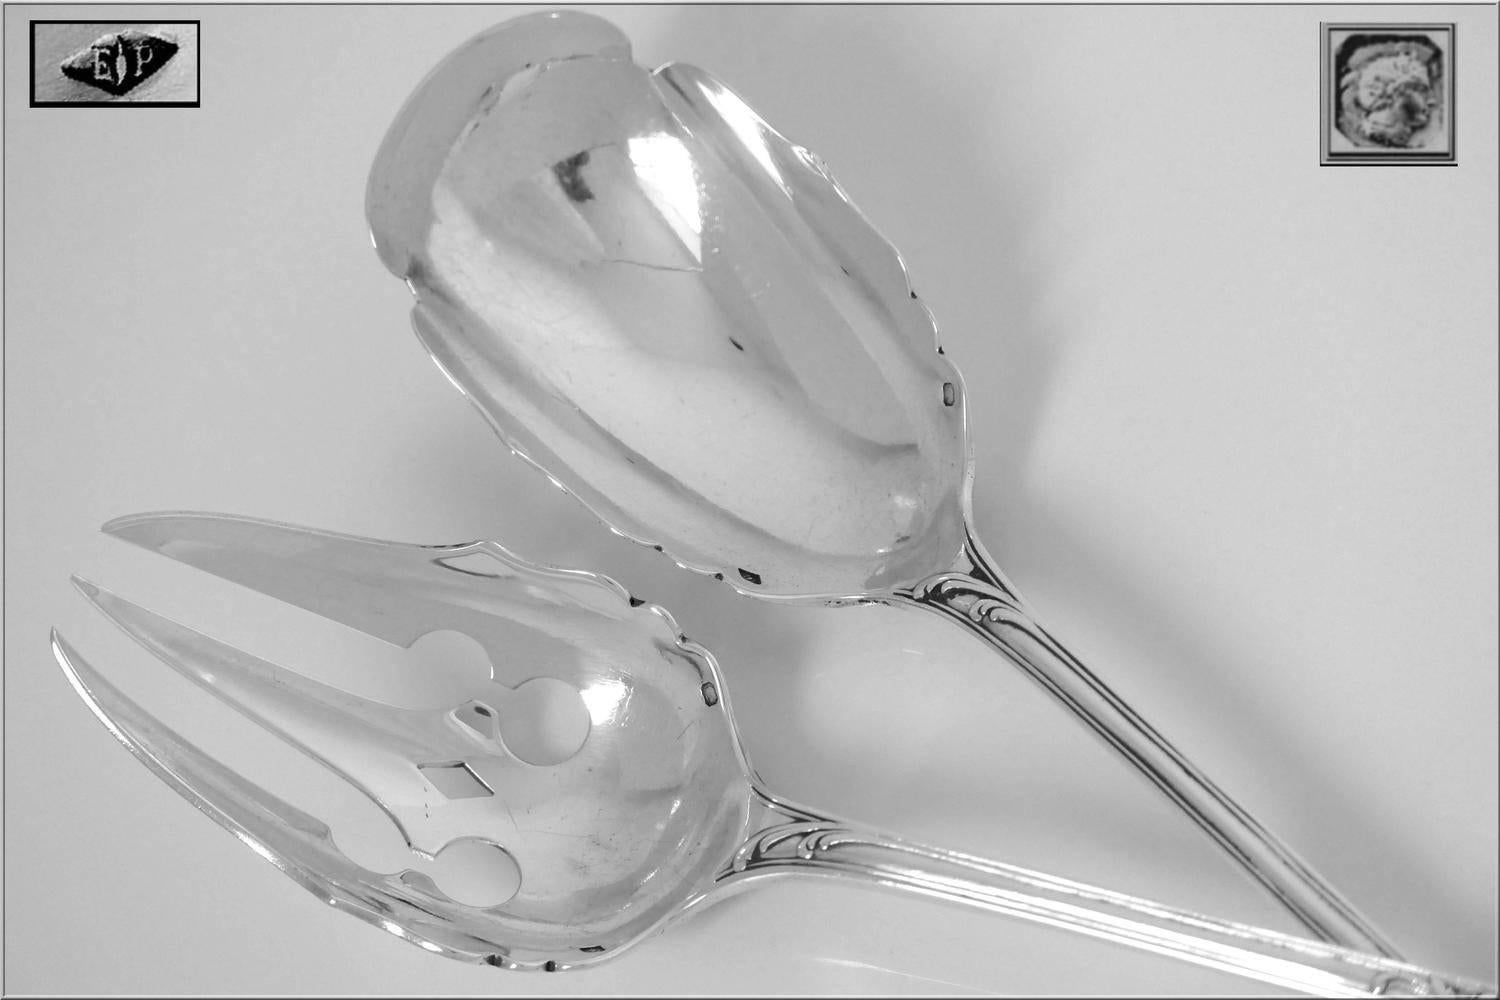 Puiforcat French all sterling silver salad serving set of two-piece Rococo.

Head of Minerve 1 st titre for 950/1000 French sterling Silver guarantee.

This salad serving set comprises a three-tined fork and a spoon with the polylobed bowl. The